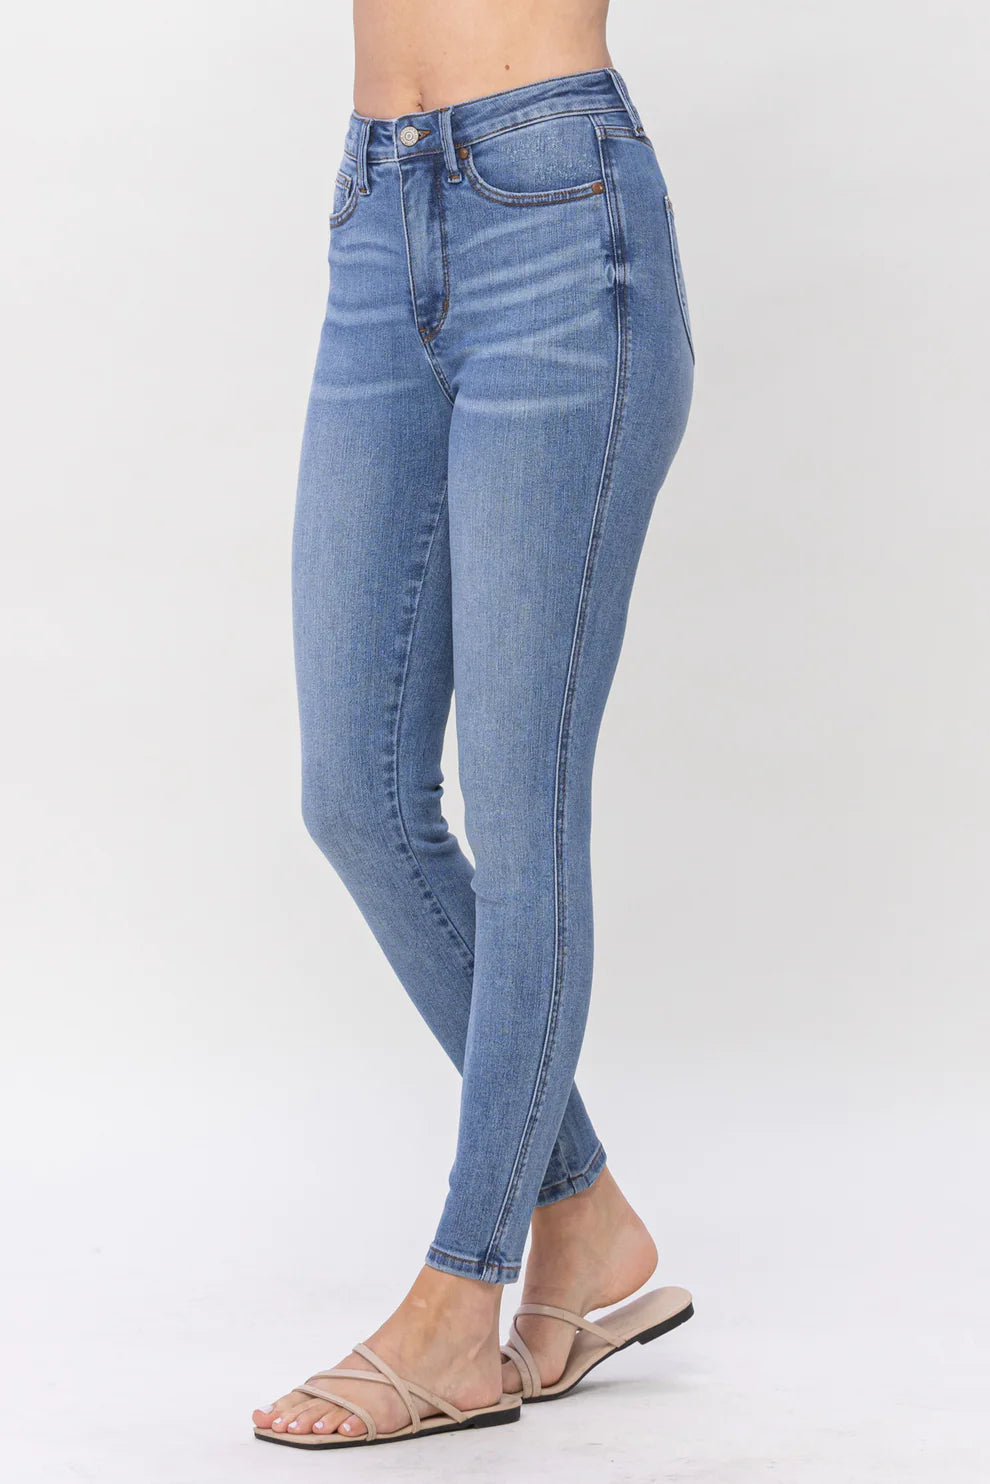 Judy Blue The Trifecta Tummy Control and Butt Lifting Skinny Jeans